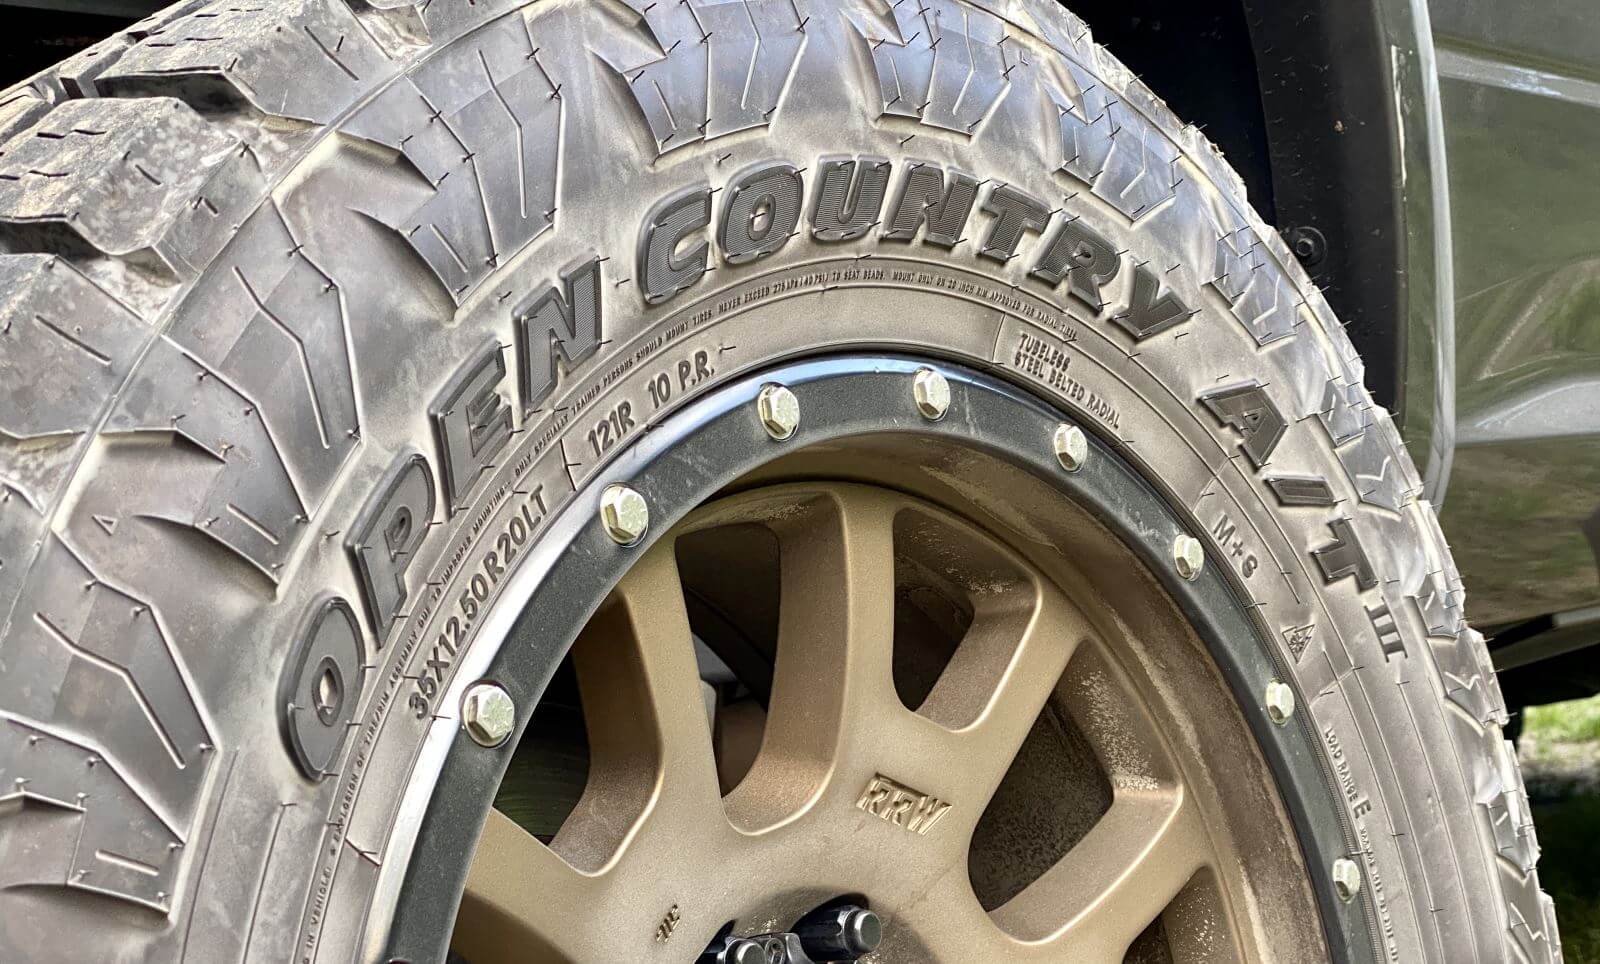 TOYO® OPEN COUNTRY A/T III - 265/70R17